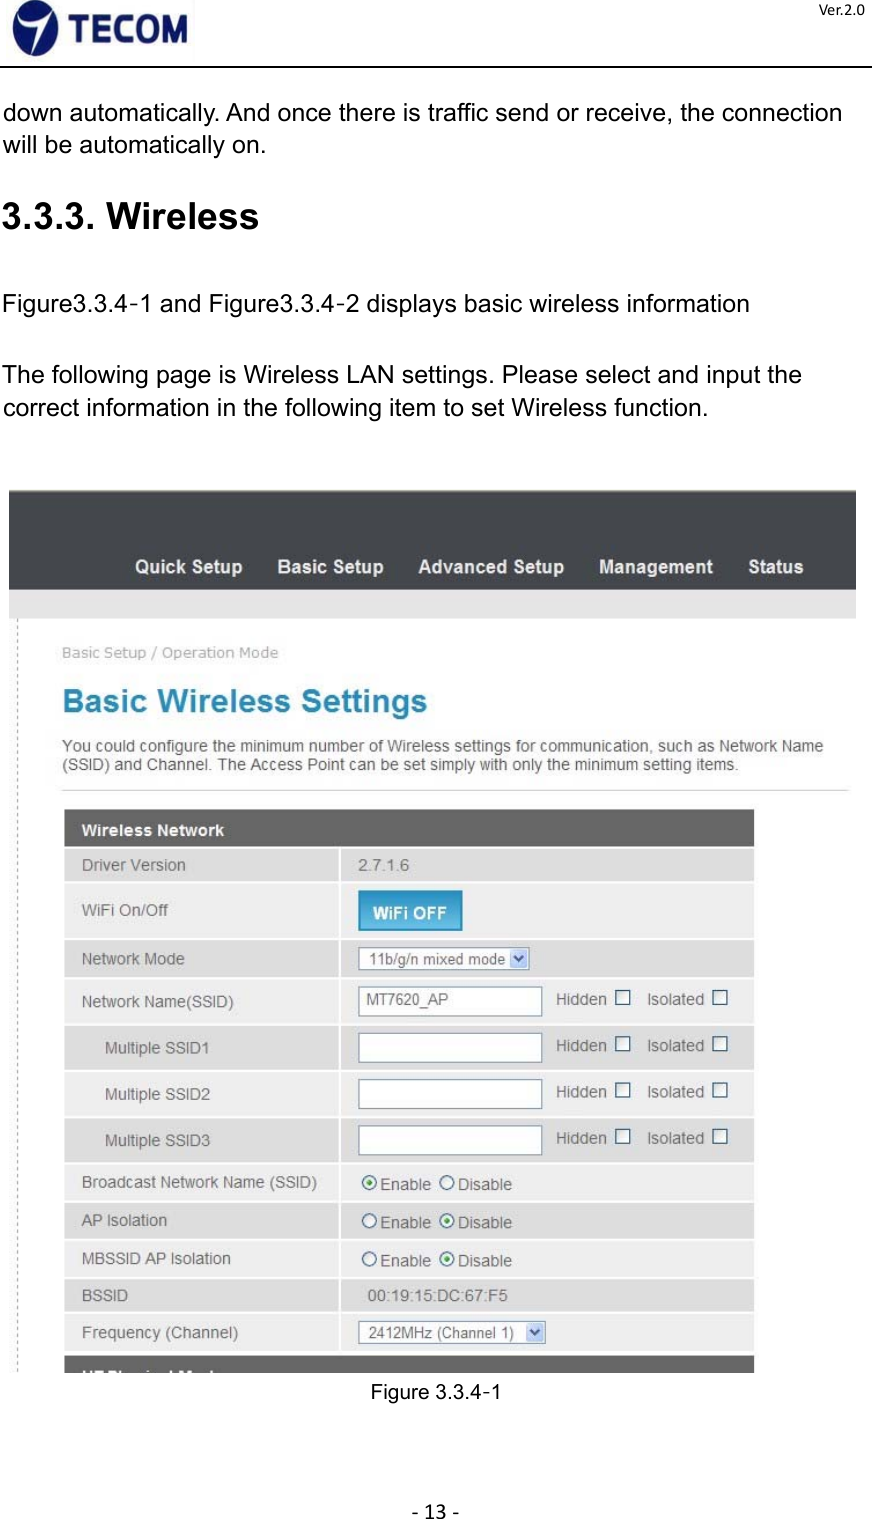  ‐13‐Ver.2.0down automatically. And once there is traffic send or receive, the connection will be automatically on.    3.3.3. Wireless    Figure3.3.4‐1 and Figure3.3.4‐2 displays basic wireless information    The following page is Wireless LAN settings. Please select and input the correct information in the following item to set Wireless function.        Figure 3.3.4‐1      